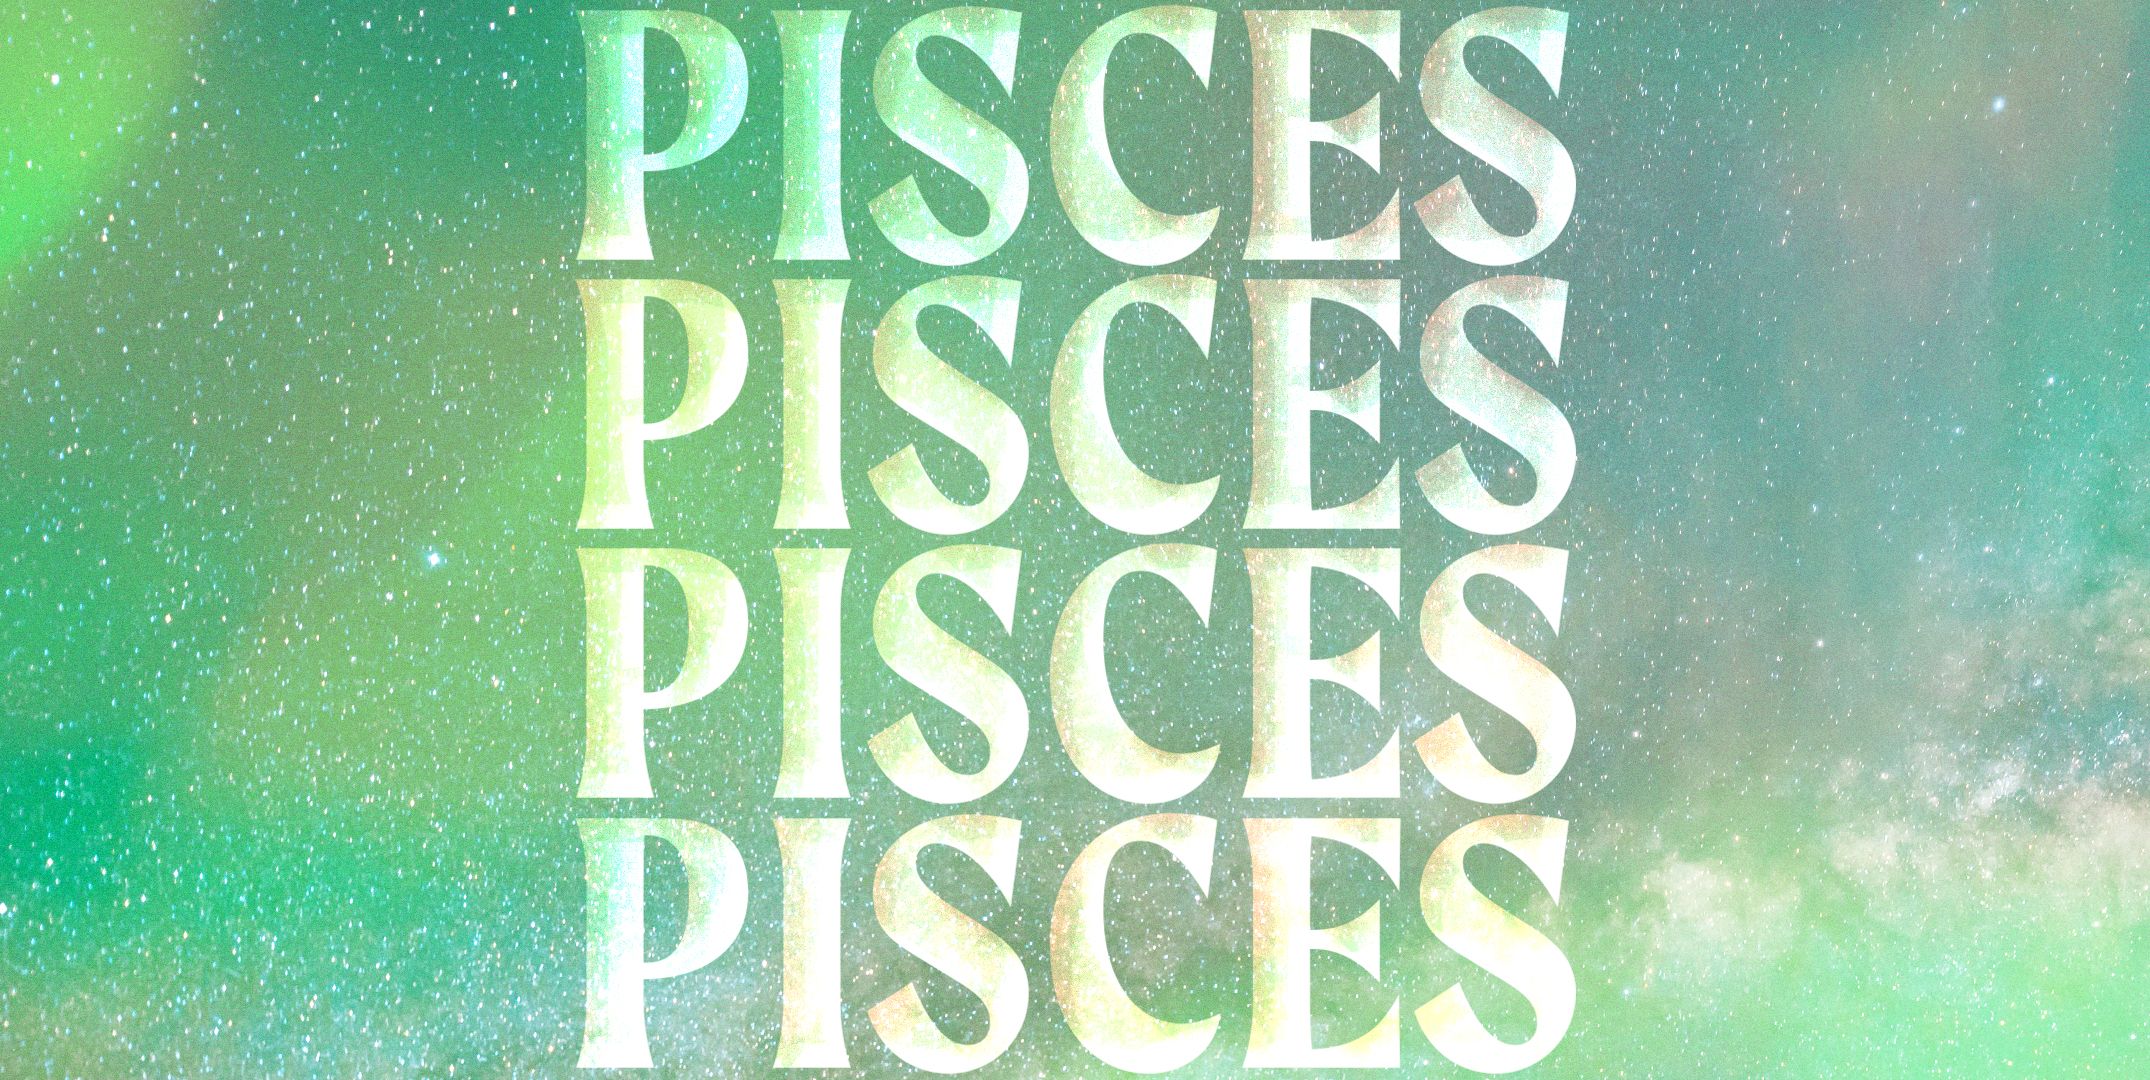 Dream Beach Group Sex - Pisces traits - What you need to know about Pisces star sign